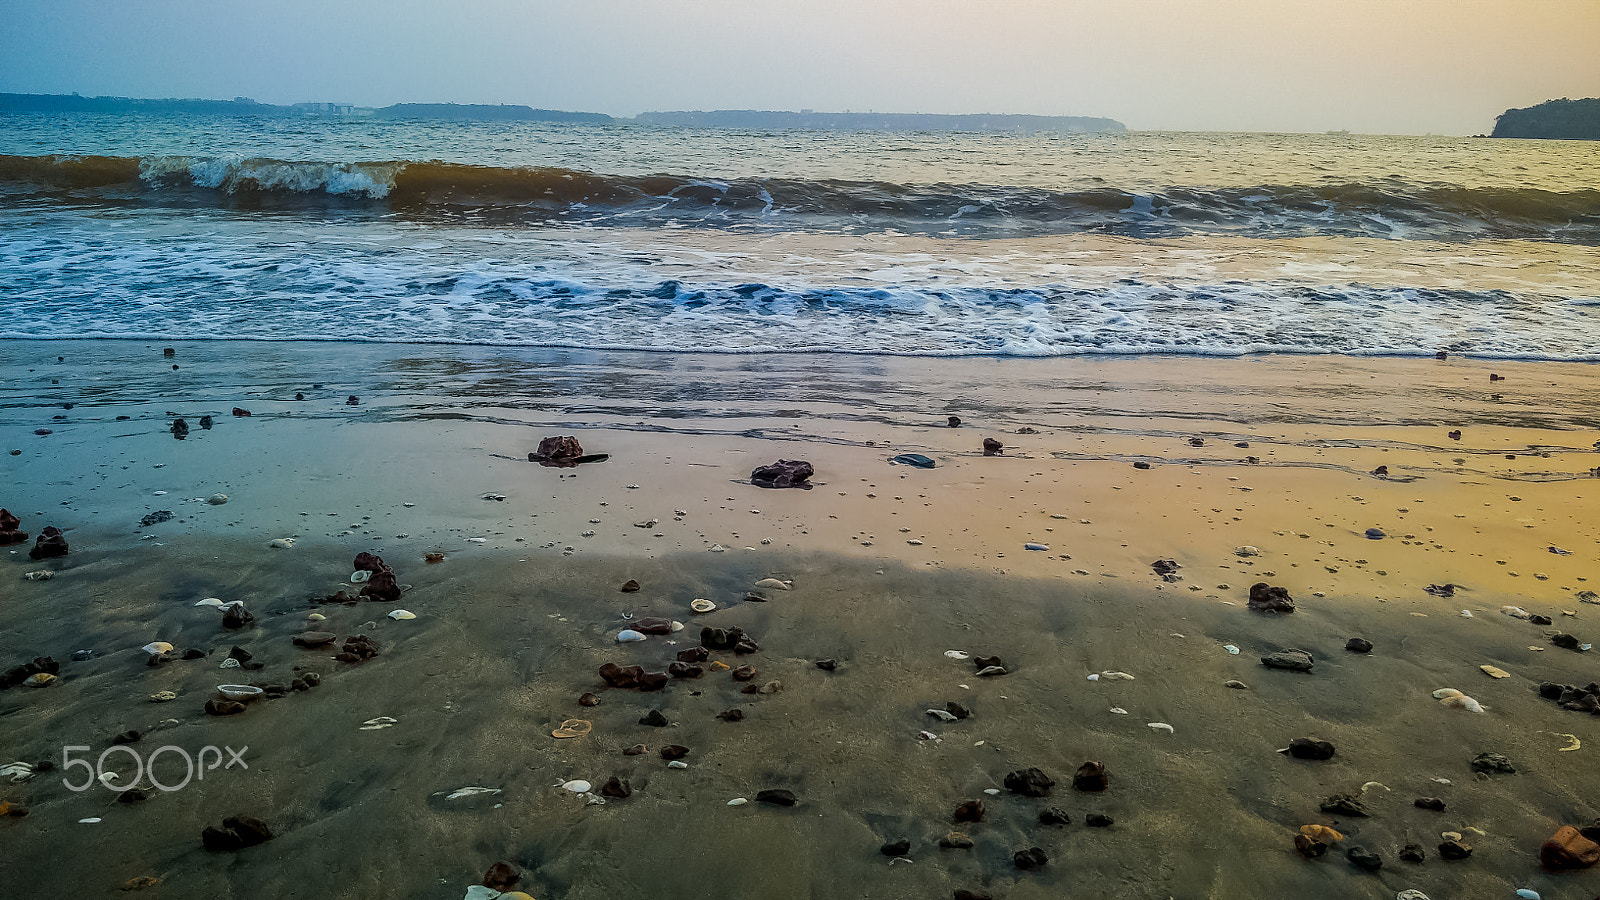 LG G Pro2 sample photo. A moment on the beach photography